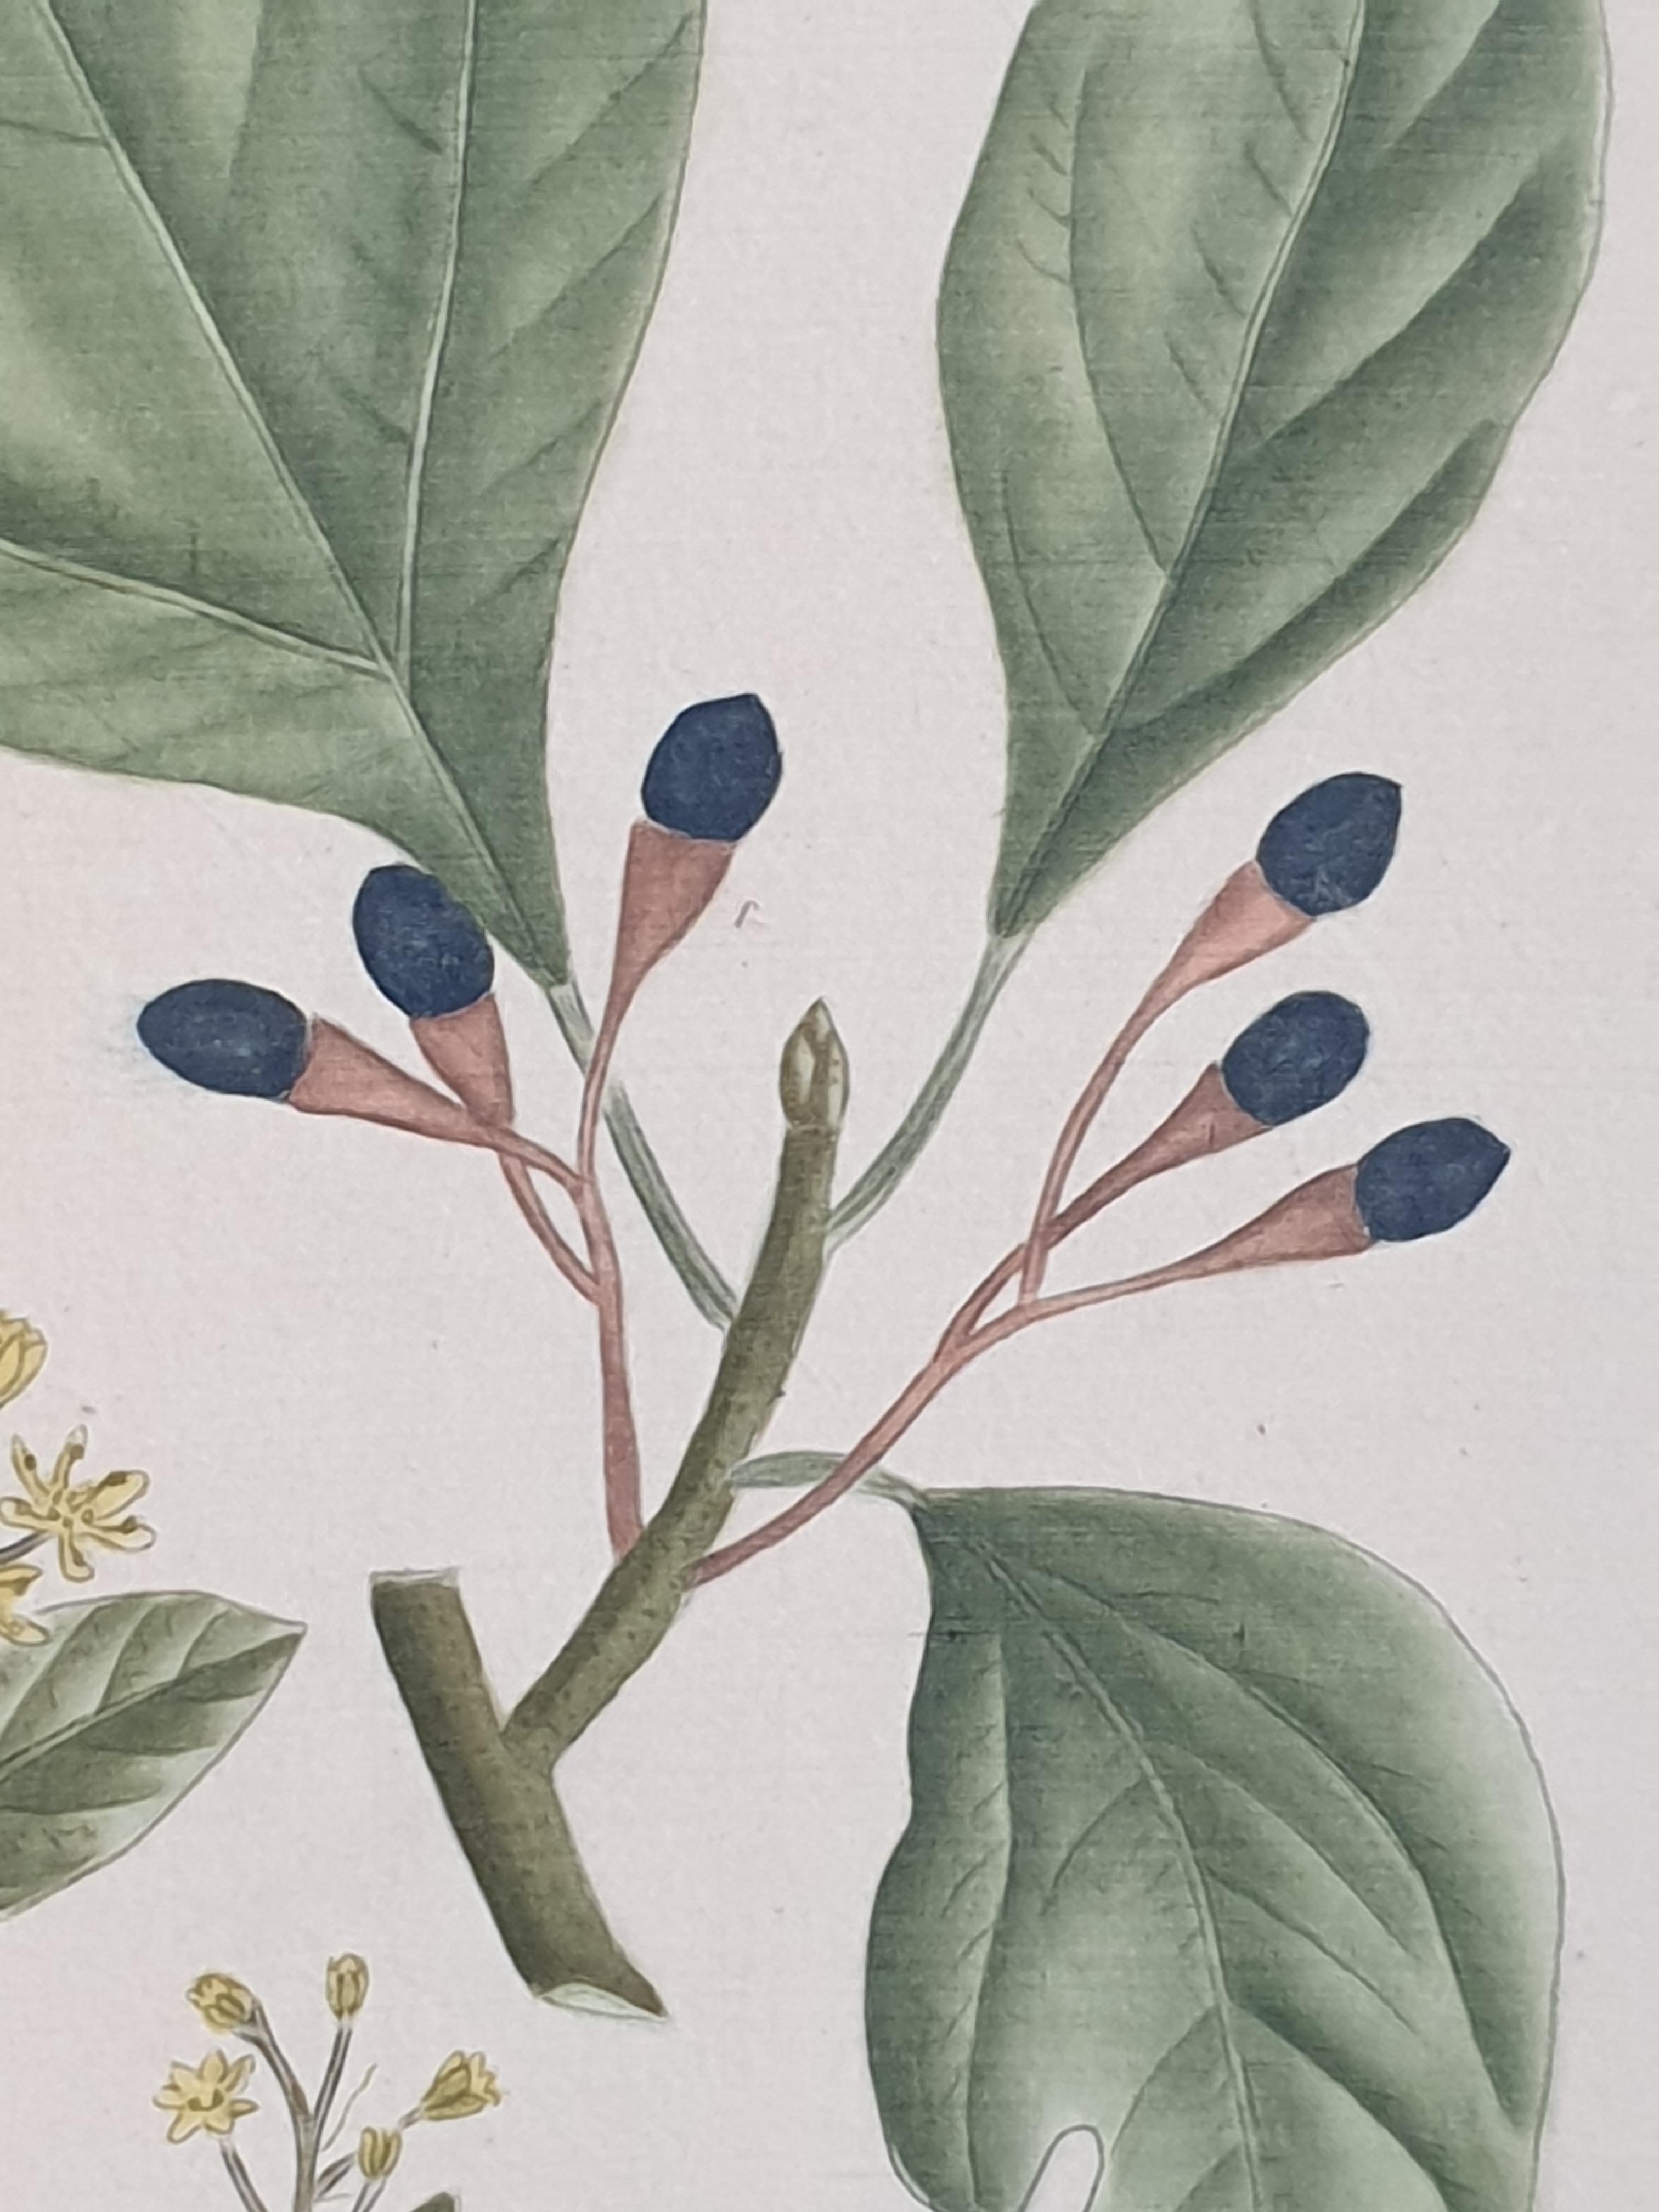 A set of four fine hand painted botanical watercolour studies on silk by La Roche Laffitte. The works are signed bottom right and titled below three of the watercolours in Latin and Greek. The silk has been mounted on handmade paper with a gilt